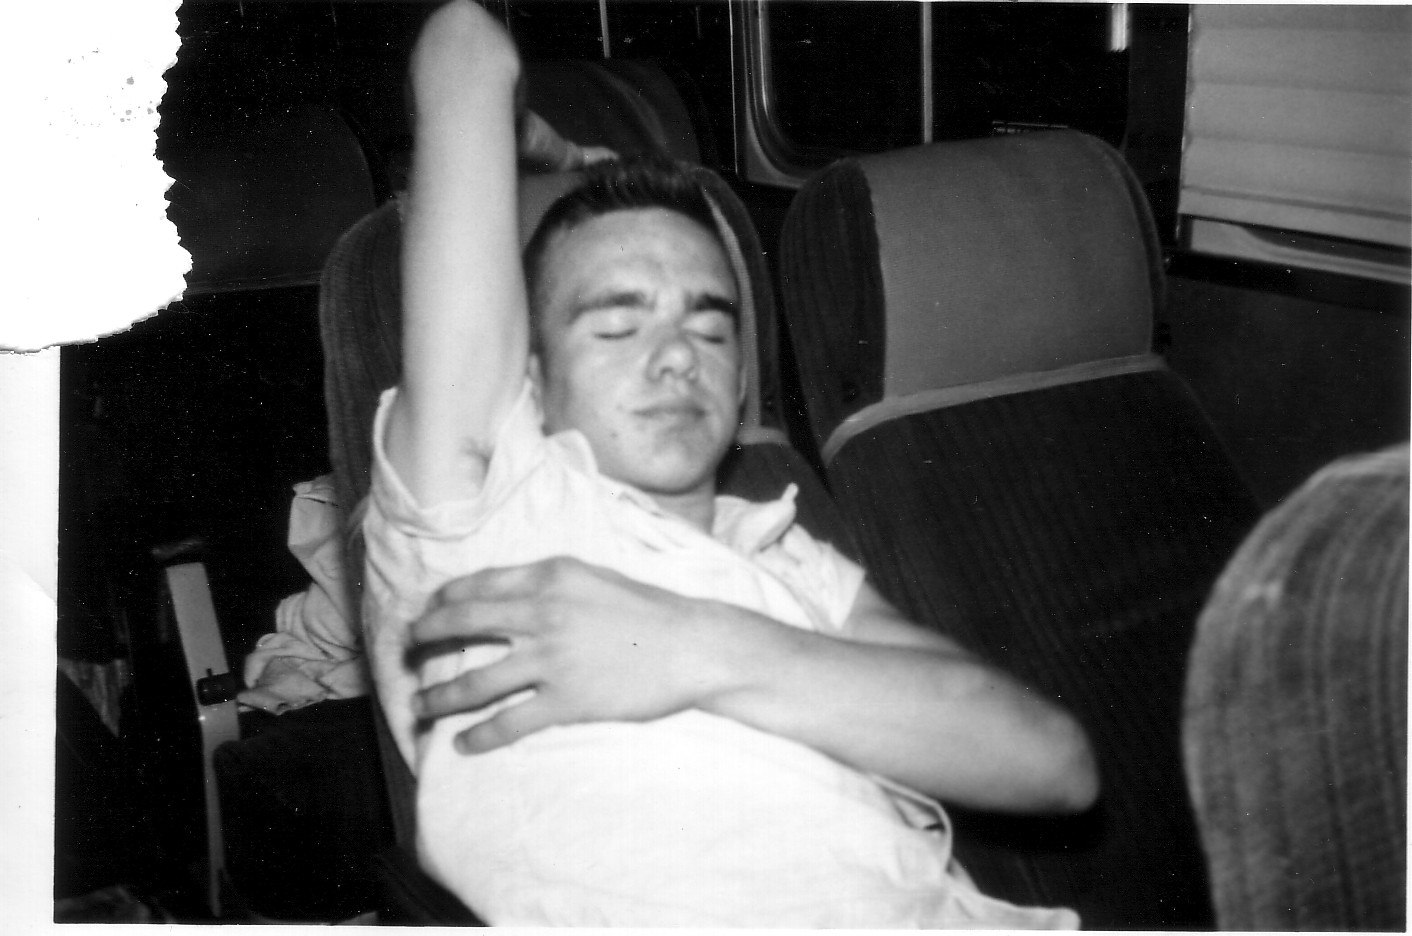 BILL MARSH THOUGHT IT WAS DIFFICULT TO BE COMFORTABLE ON A GREYHOUND BUS.